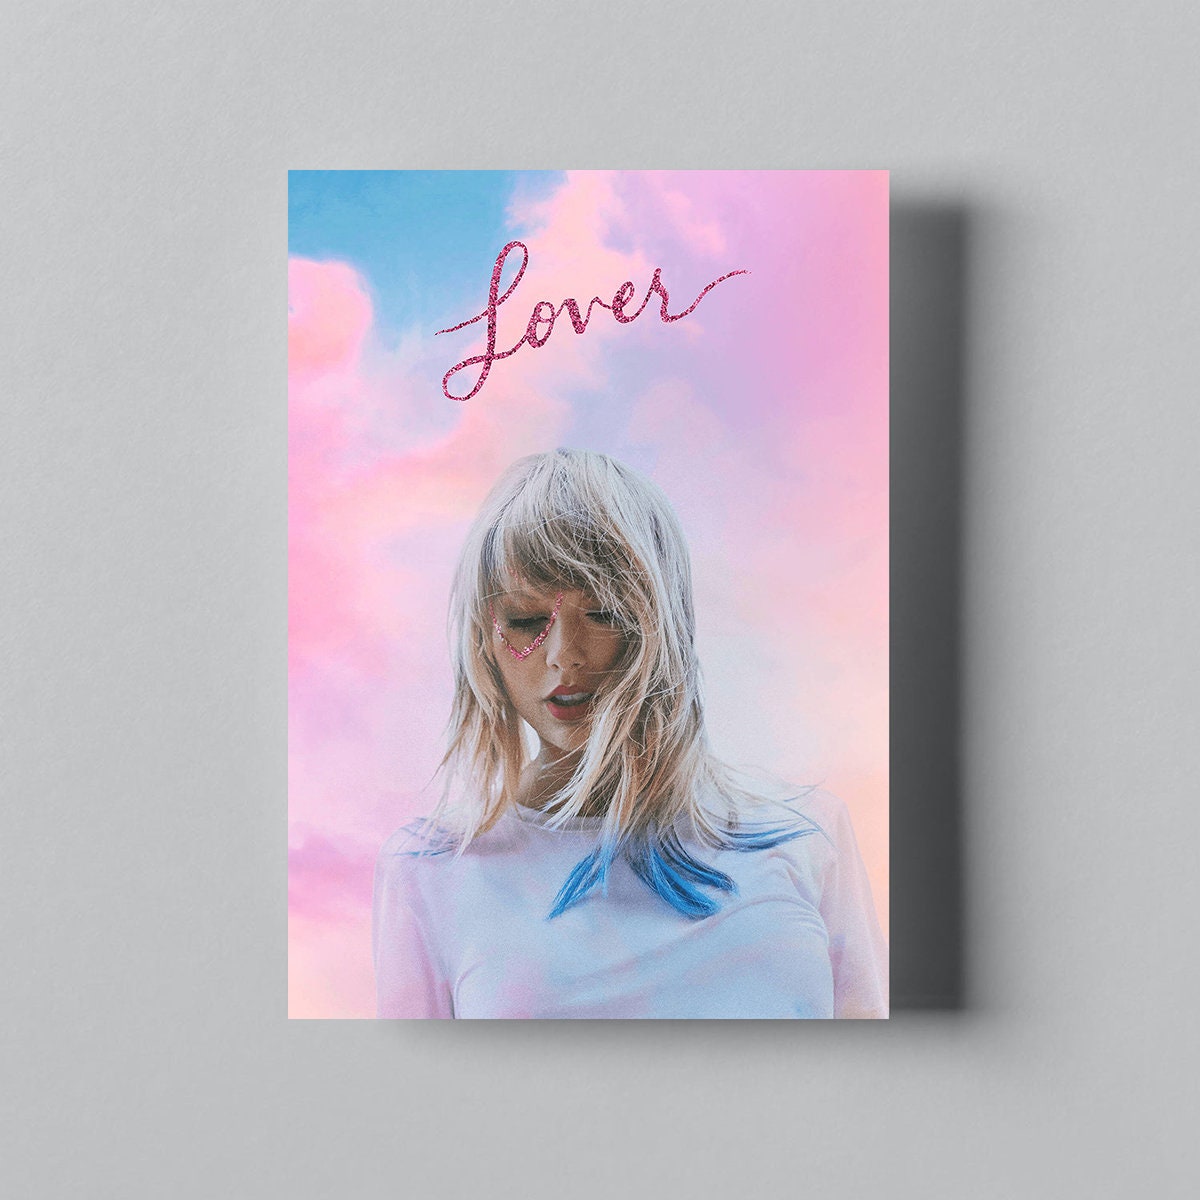 Discover Lover - Taylor Poster - Album Minimalism Poster - Album Cover Print